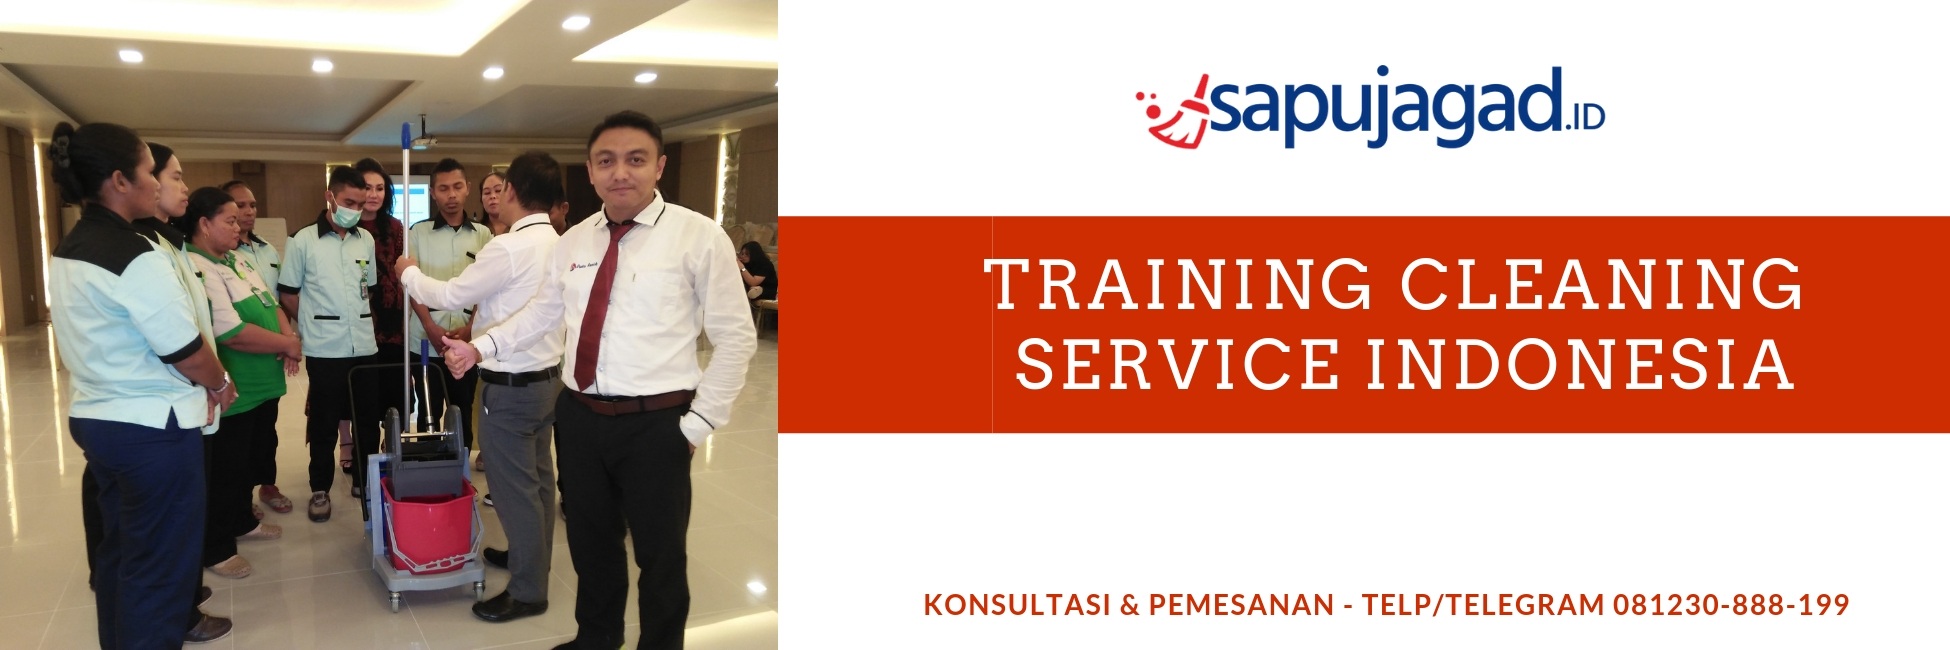 training-cleaning-service